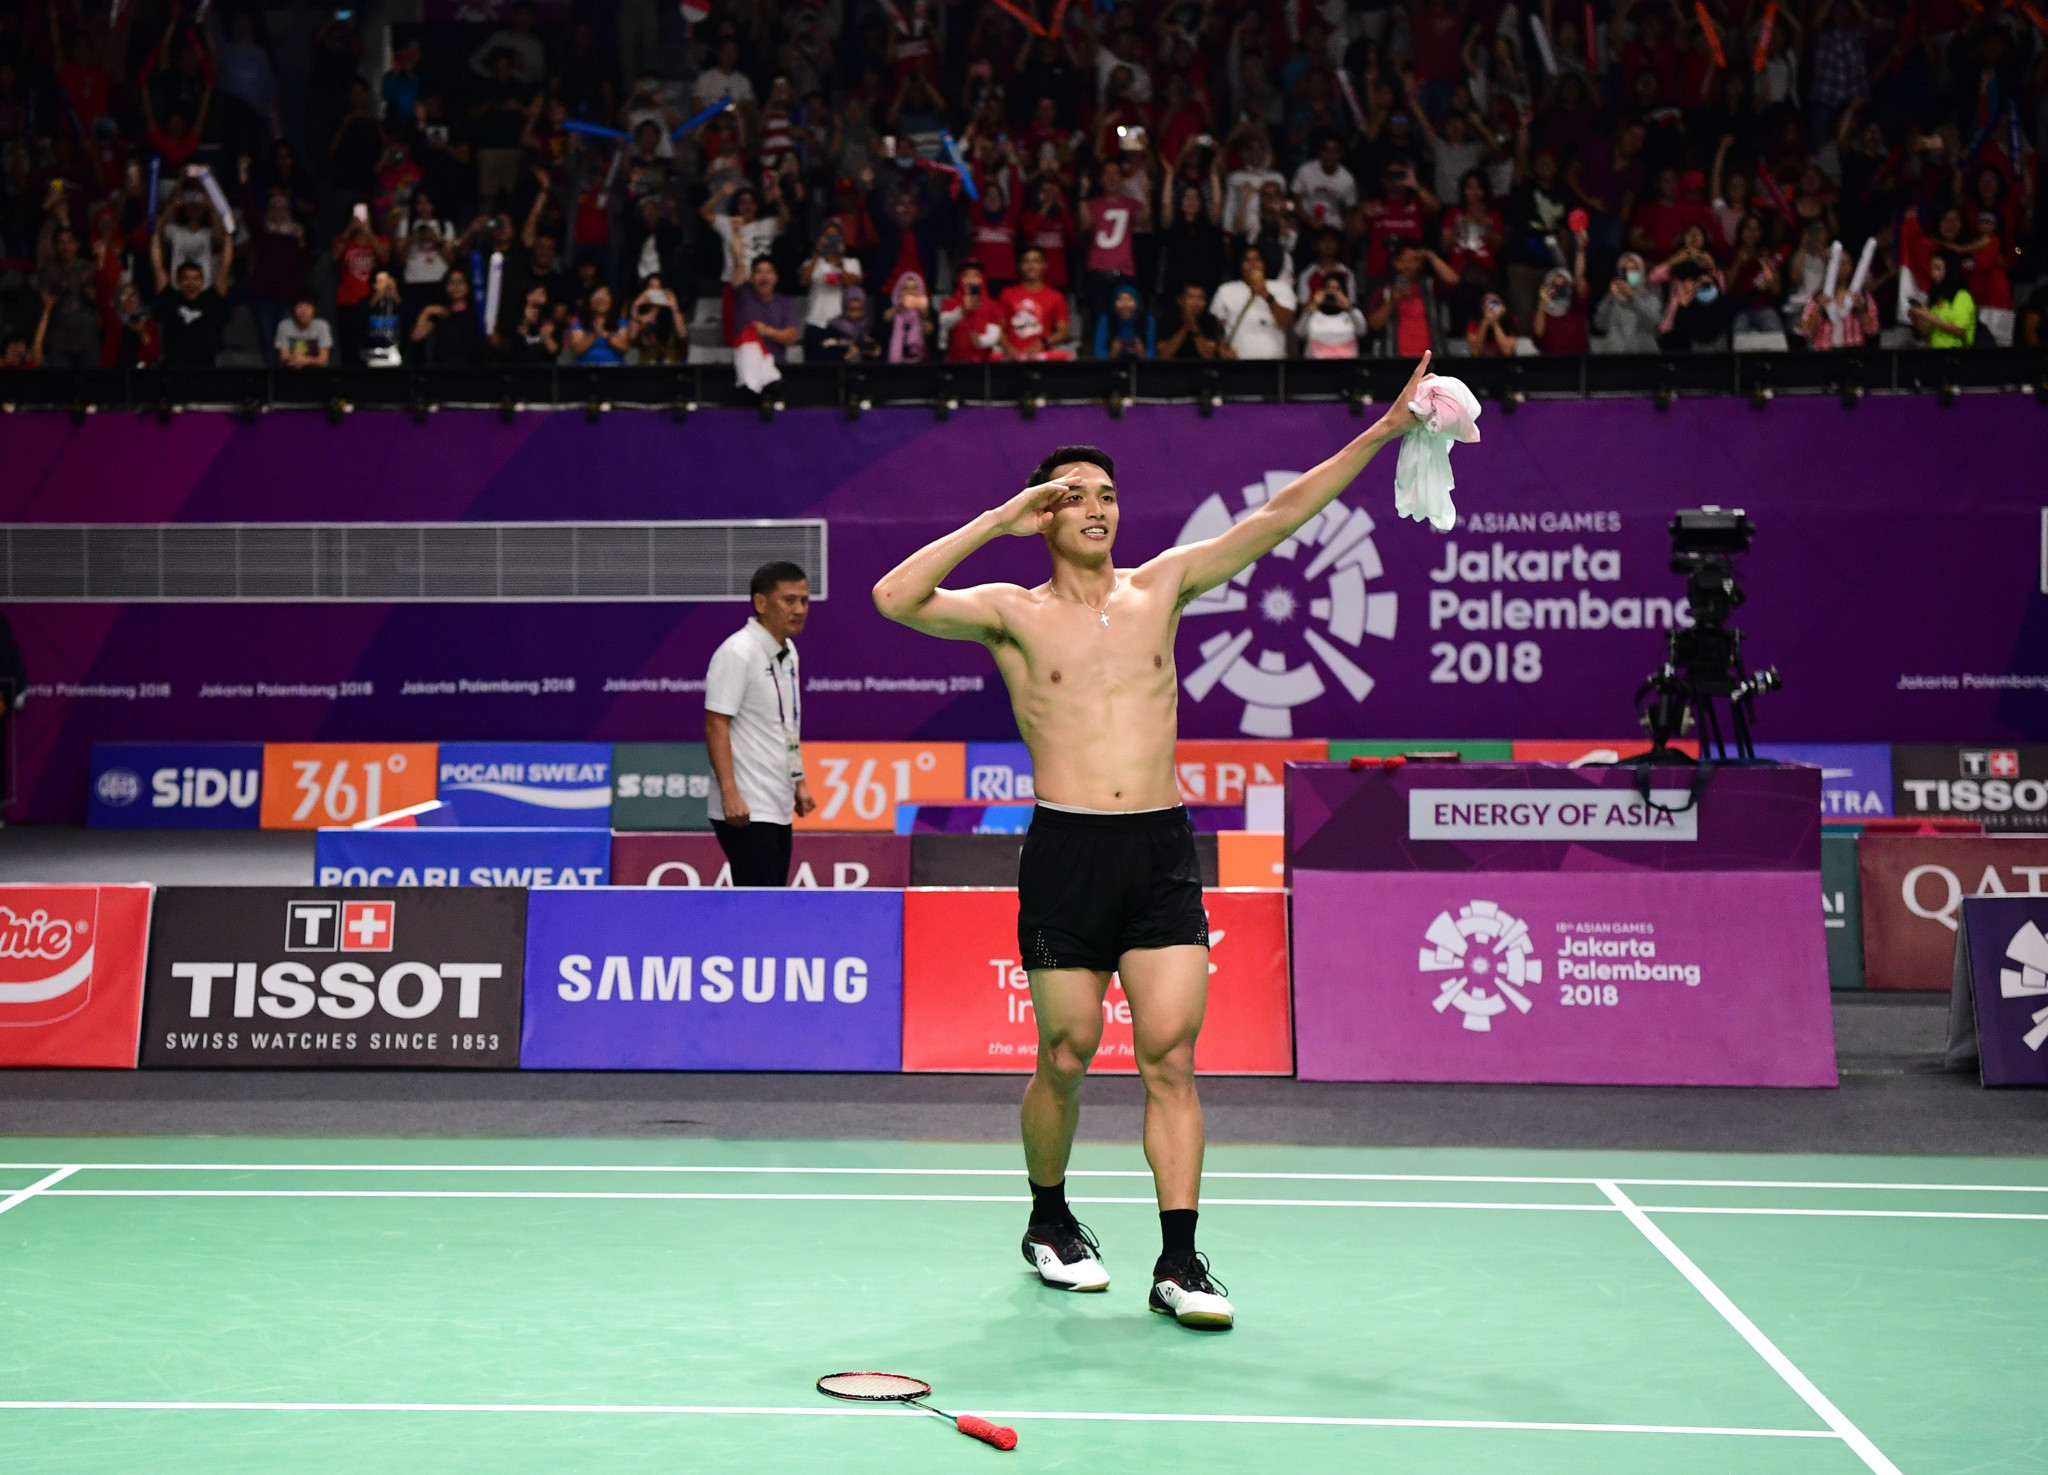 Jonatan Christie became the toast of Indonesia after winning the men’s singles badminton title on day 10 of the 2018 Asian Games in Jakarta and Palembang ©Getty Images